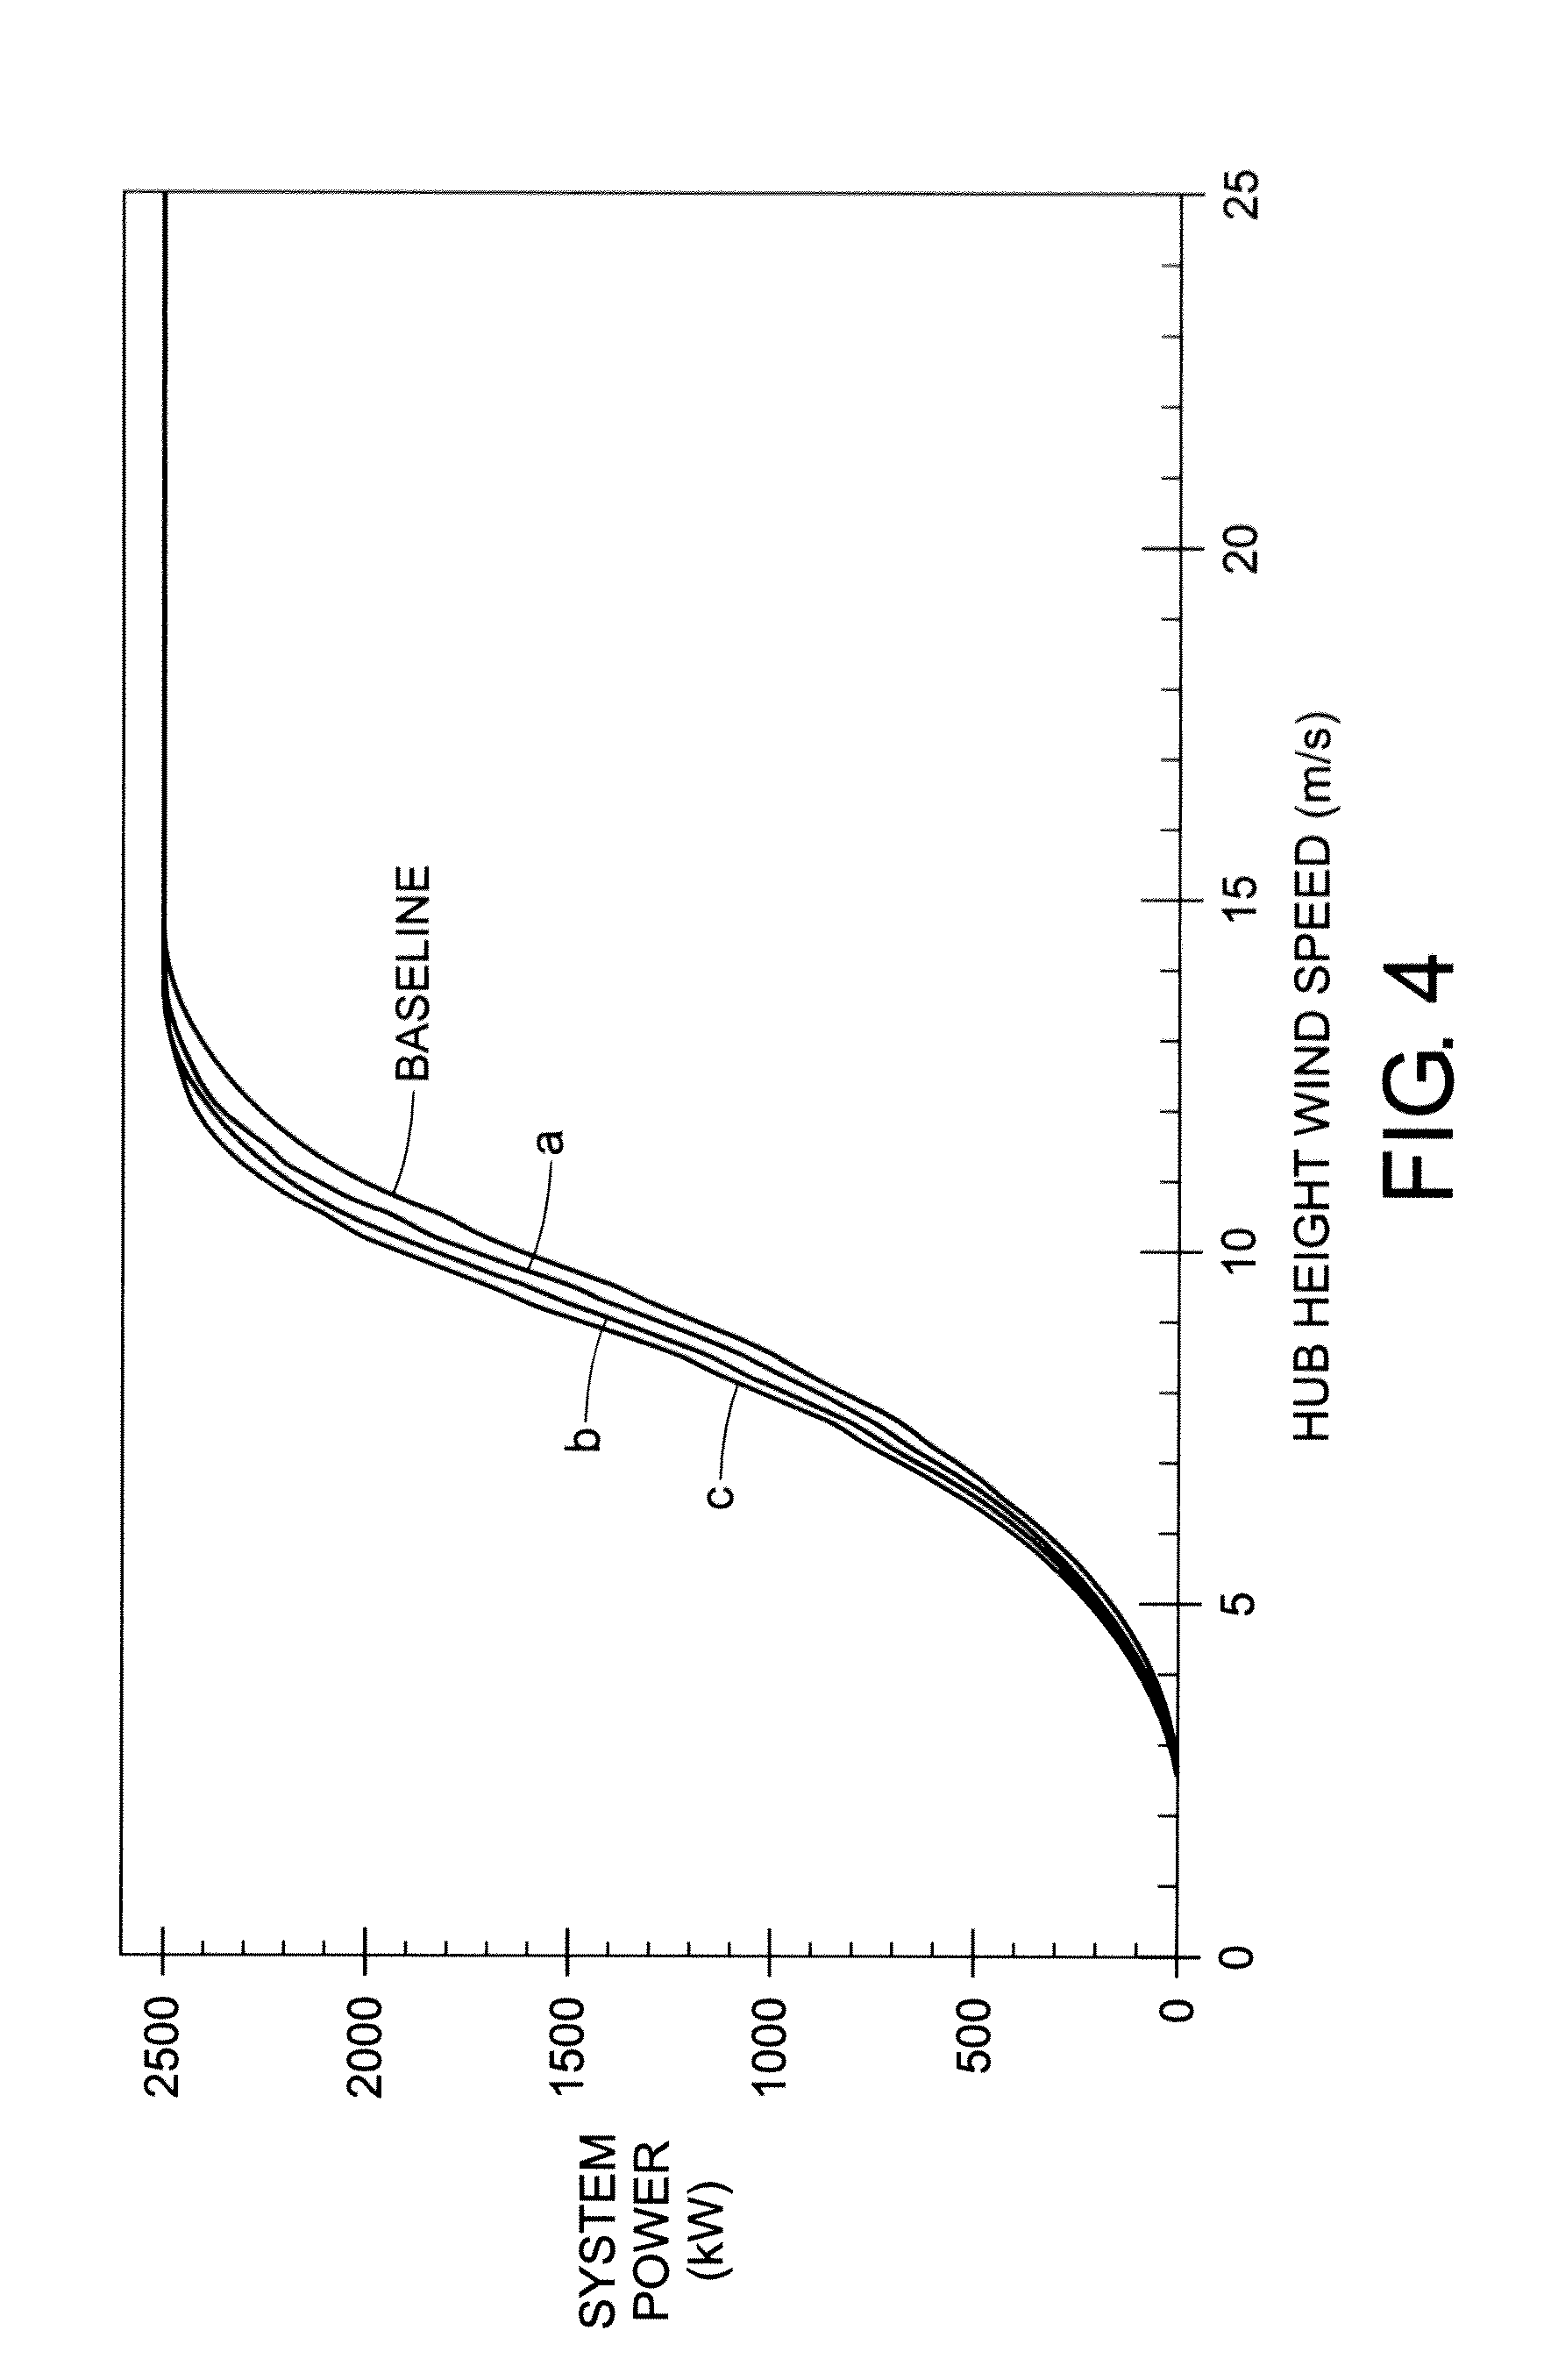 Method for site specific energy capture optimization through modular rotor blade tip extension